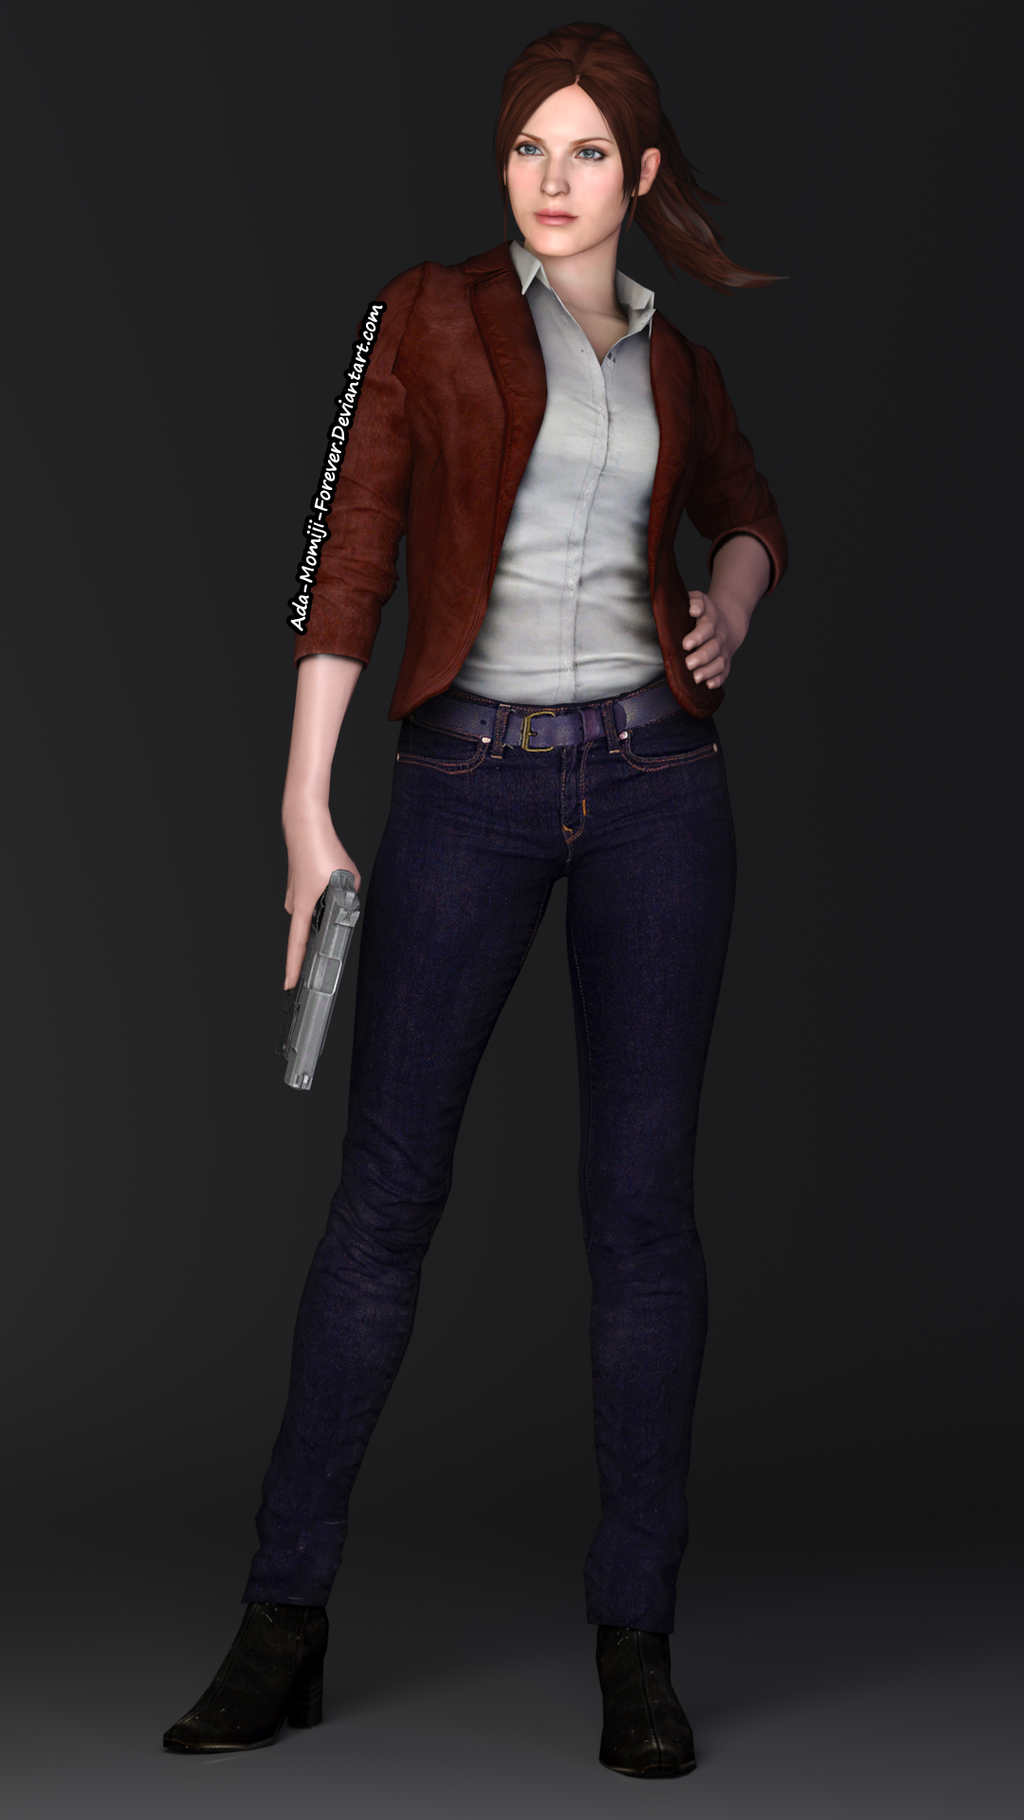 claire_redfield_revelations_2_render_by_ada_momiji_forever-d92s32q.png